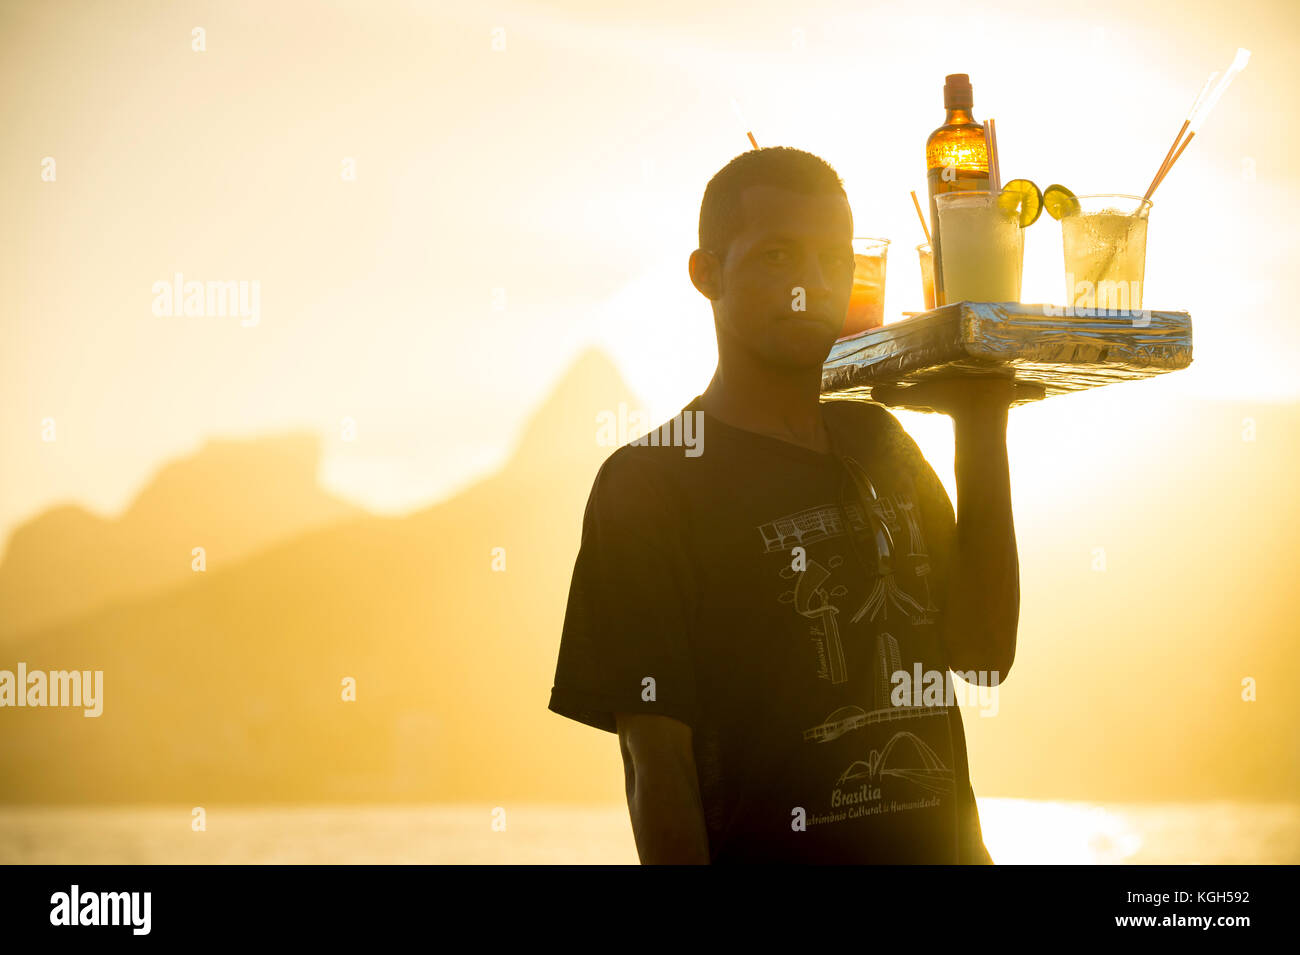 RIO DE JANEIRO - MARCH 20, 2017: Sunset silhouette of young man selling caipirinha cocktails at Arpoador with Two Brothers mountain in the background. Stock Photo